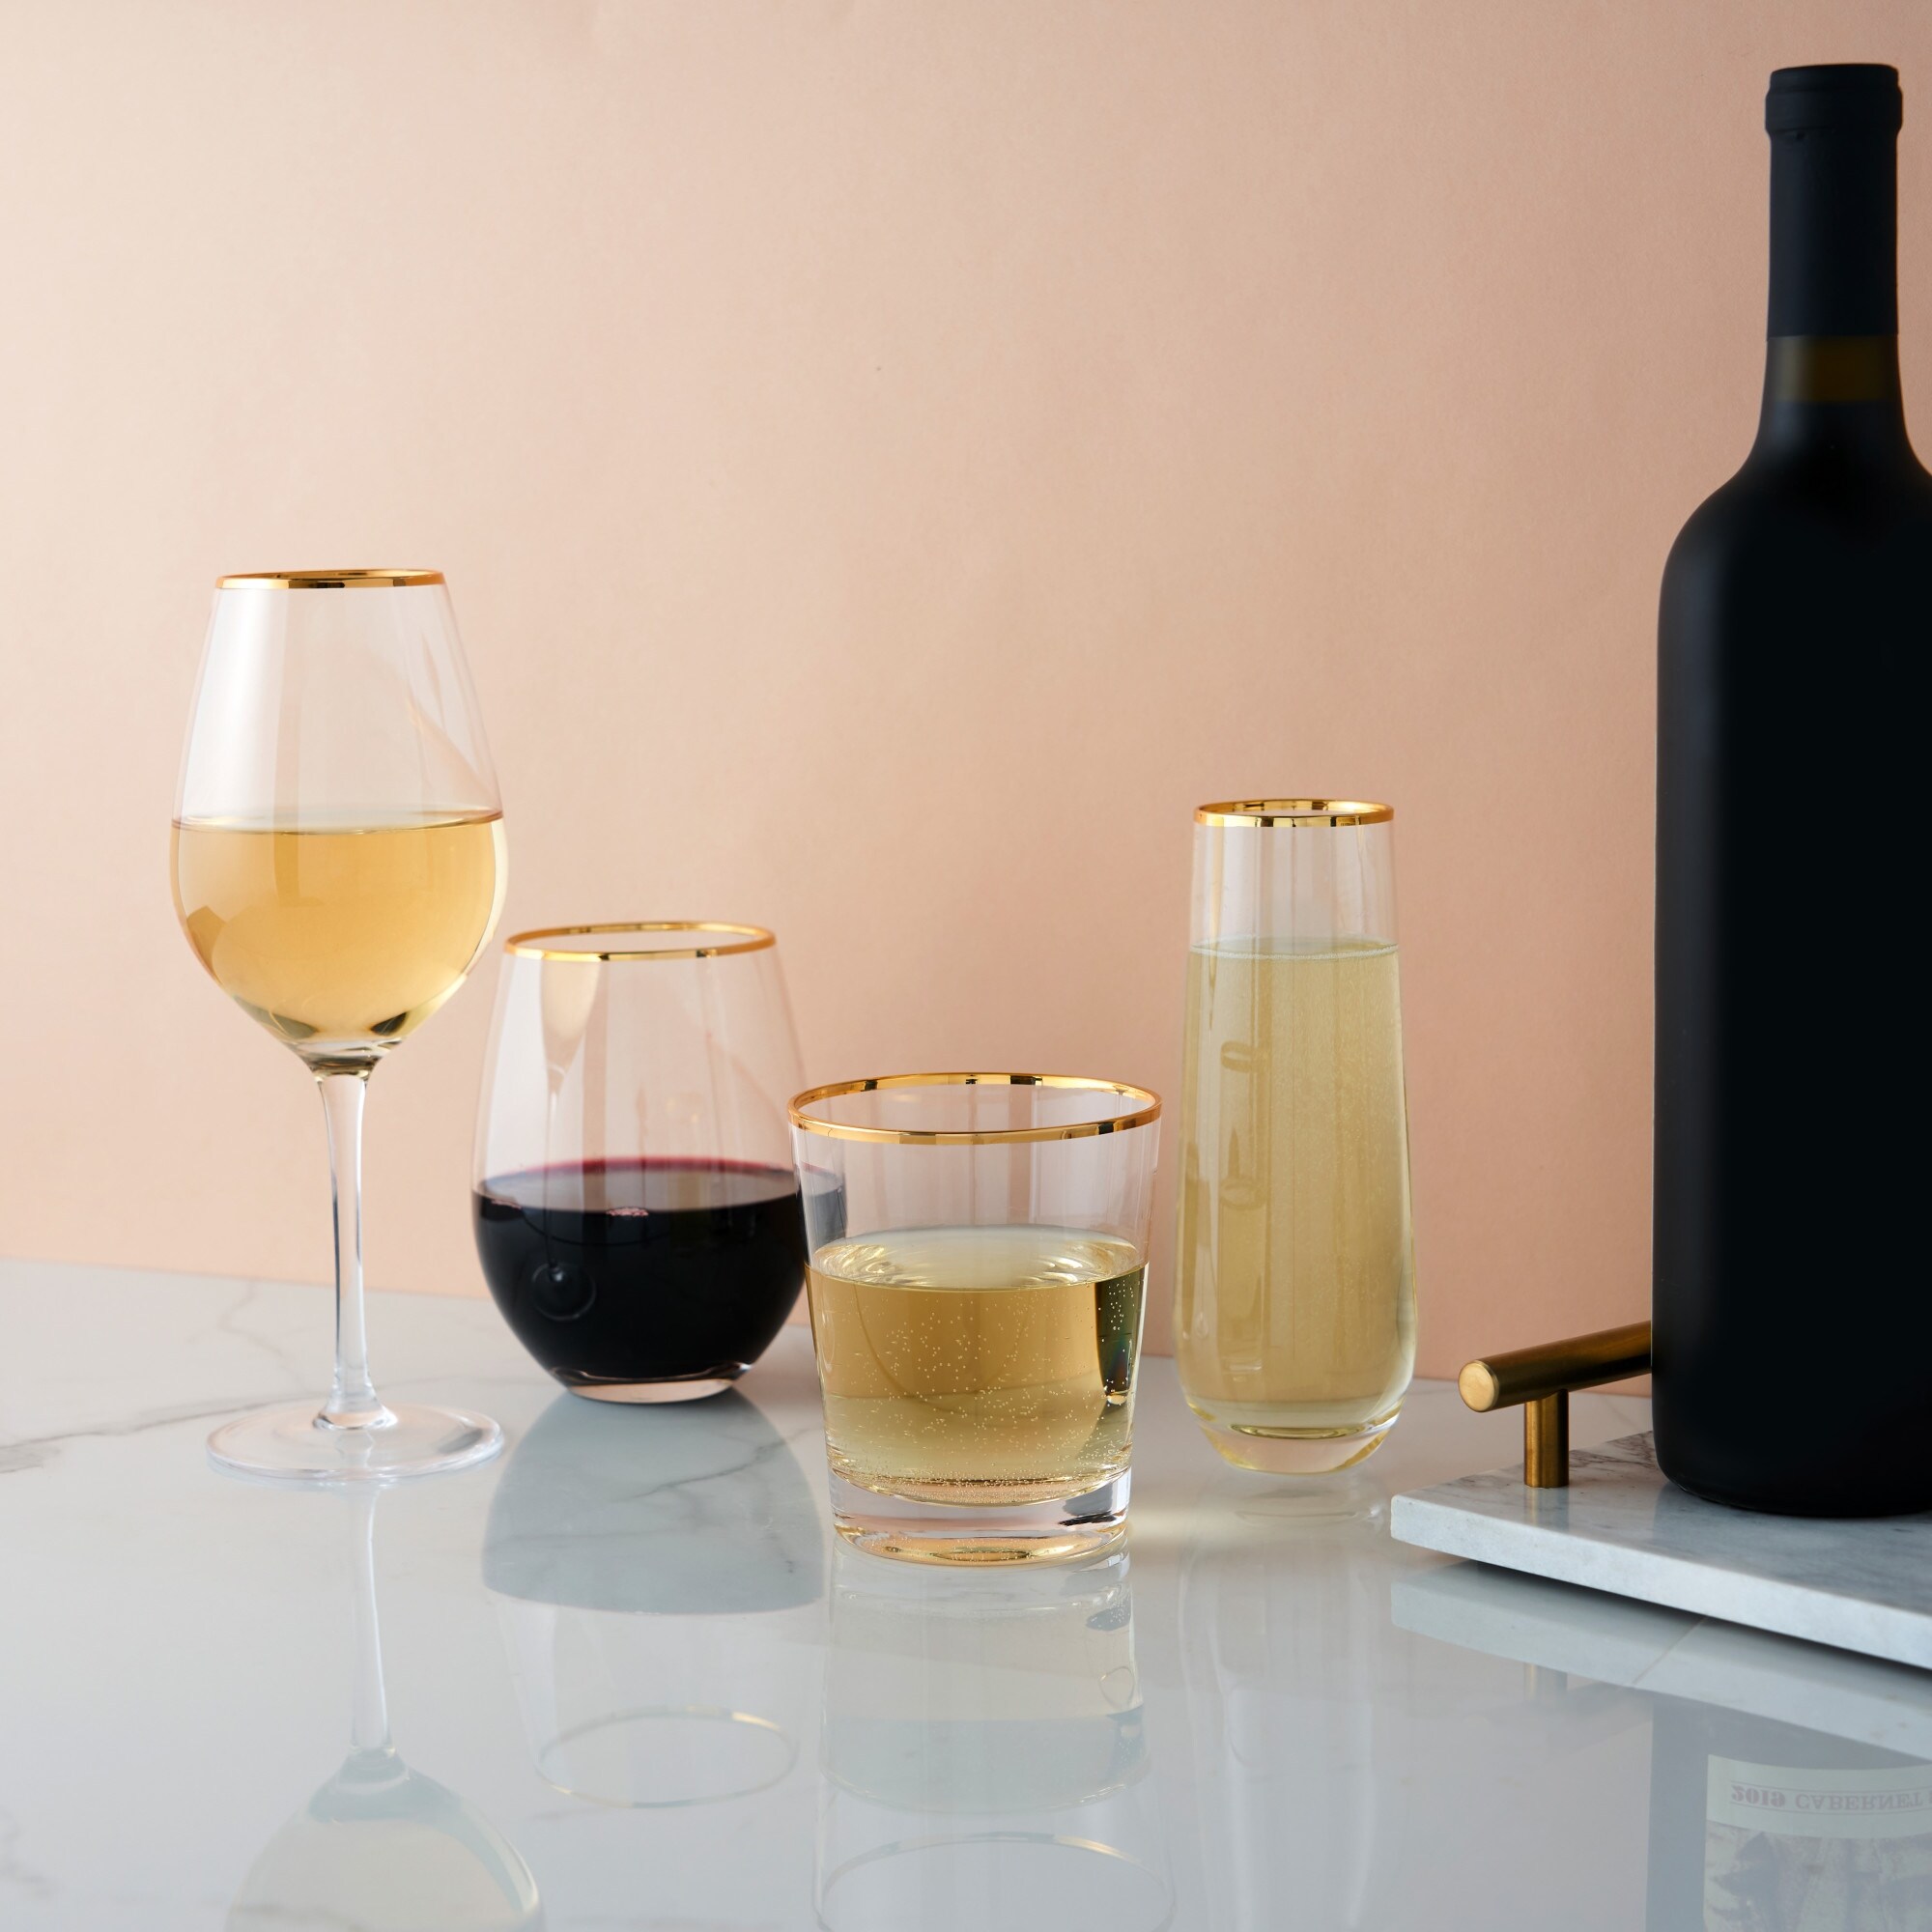 https://ak1.ostkcdn.com/images/products/is/images/direct/4e87d71cacd6160ef513a3580e8a8e92d0a21391/Gilded-Stemless-Wine-Glass-Set-by-Twine.jpg